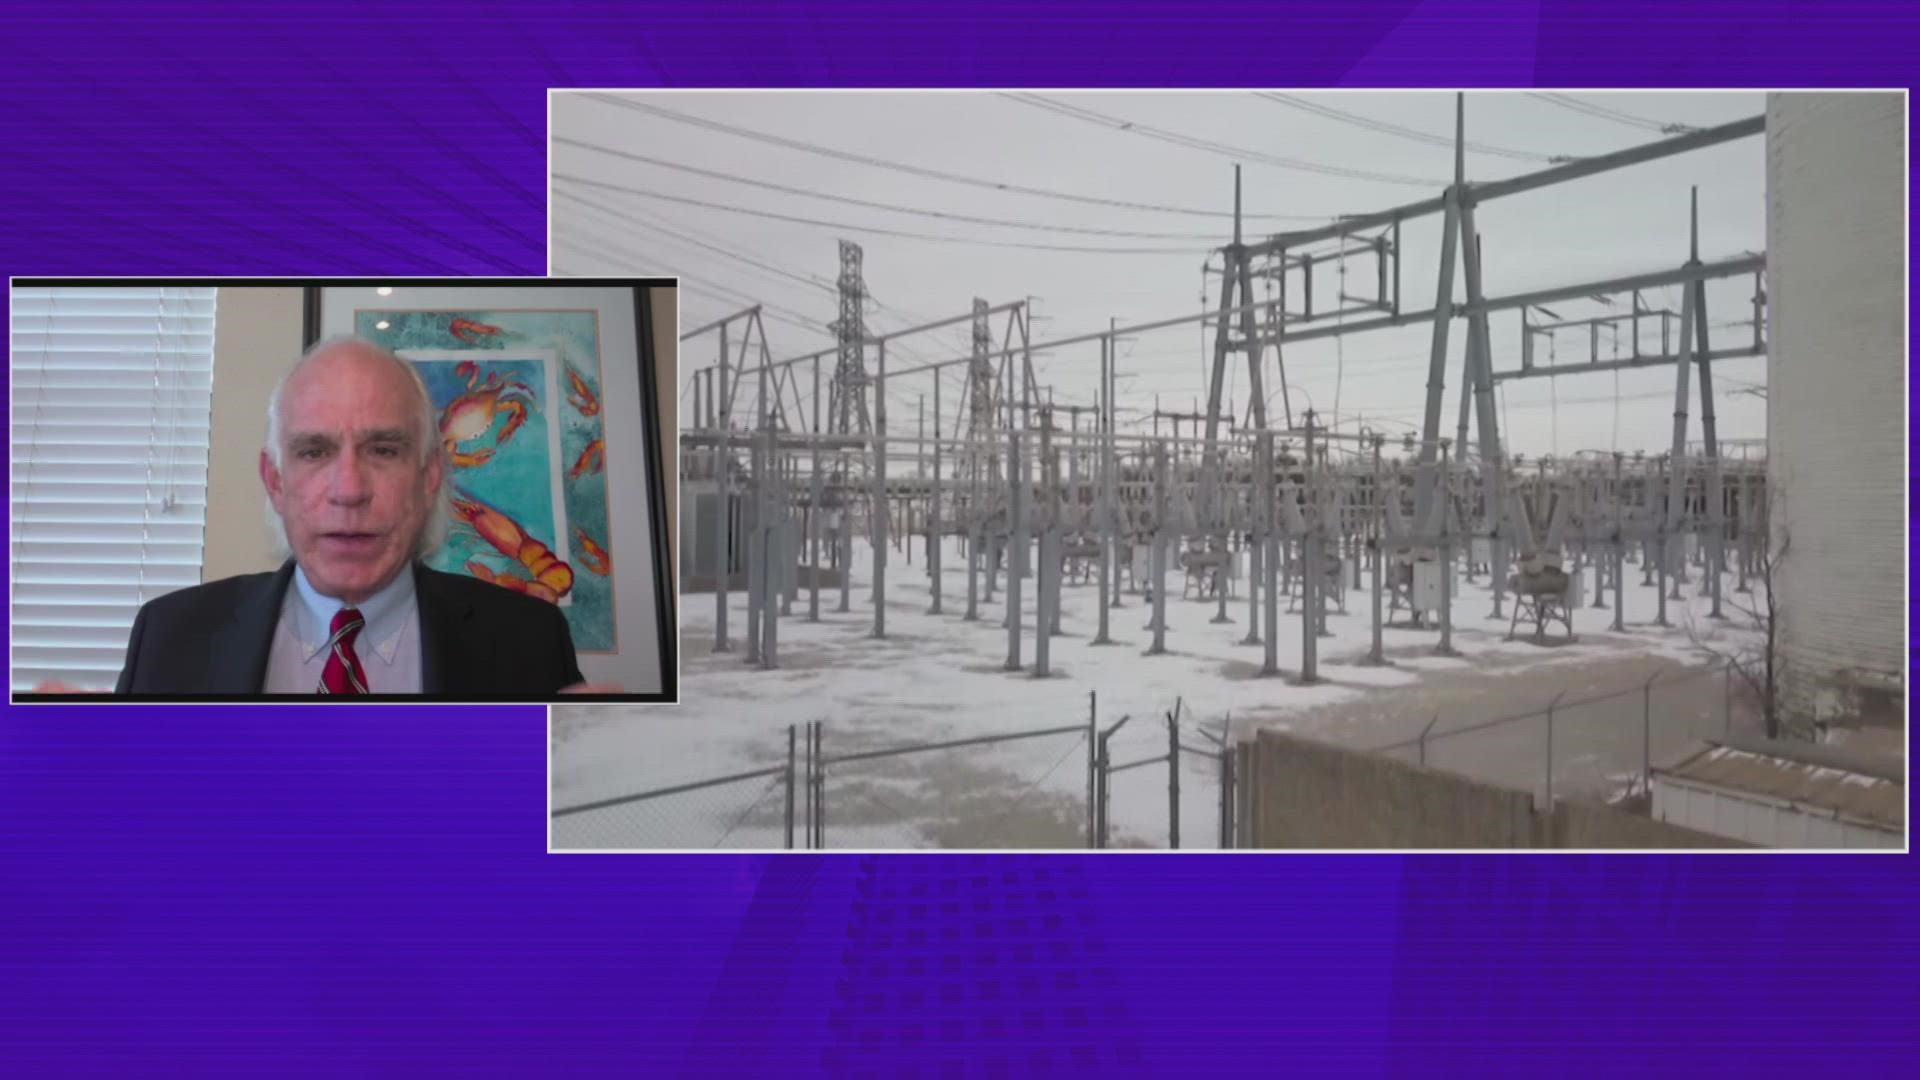 Federal officials have released their final report on the February storm. KHOU energy expert Ed Hirs shares his thoughts on the report and potential winter storms.